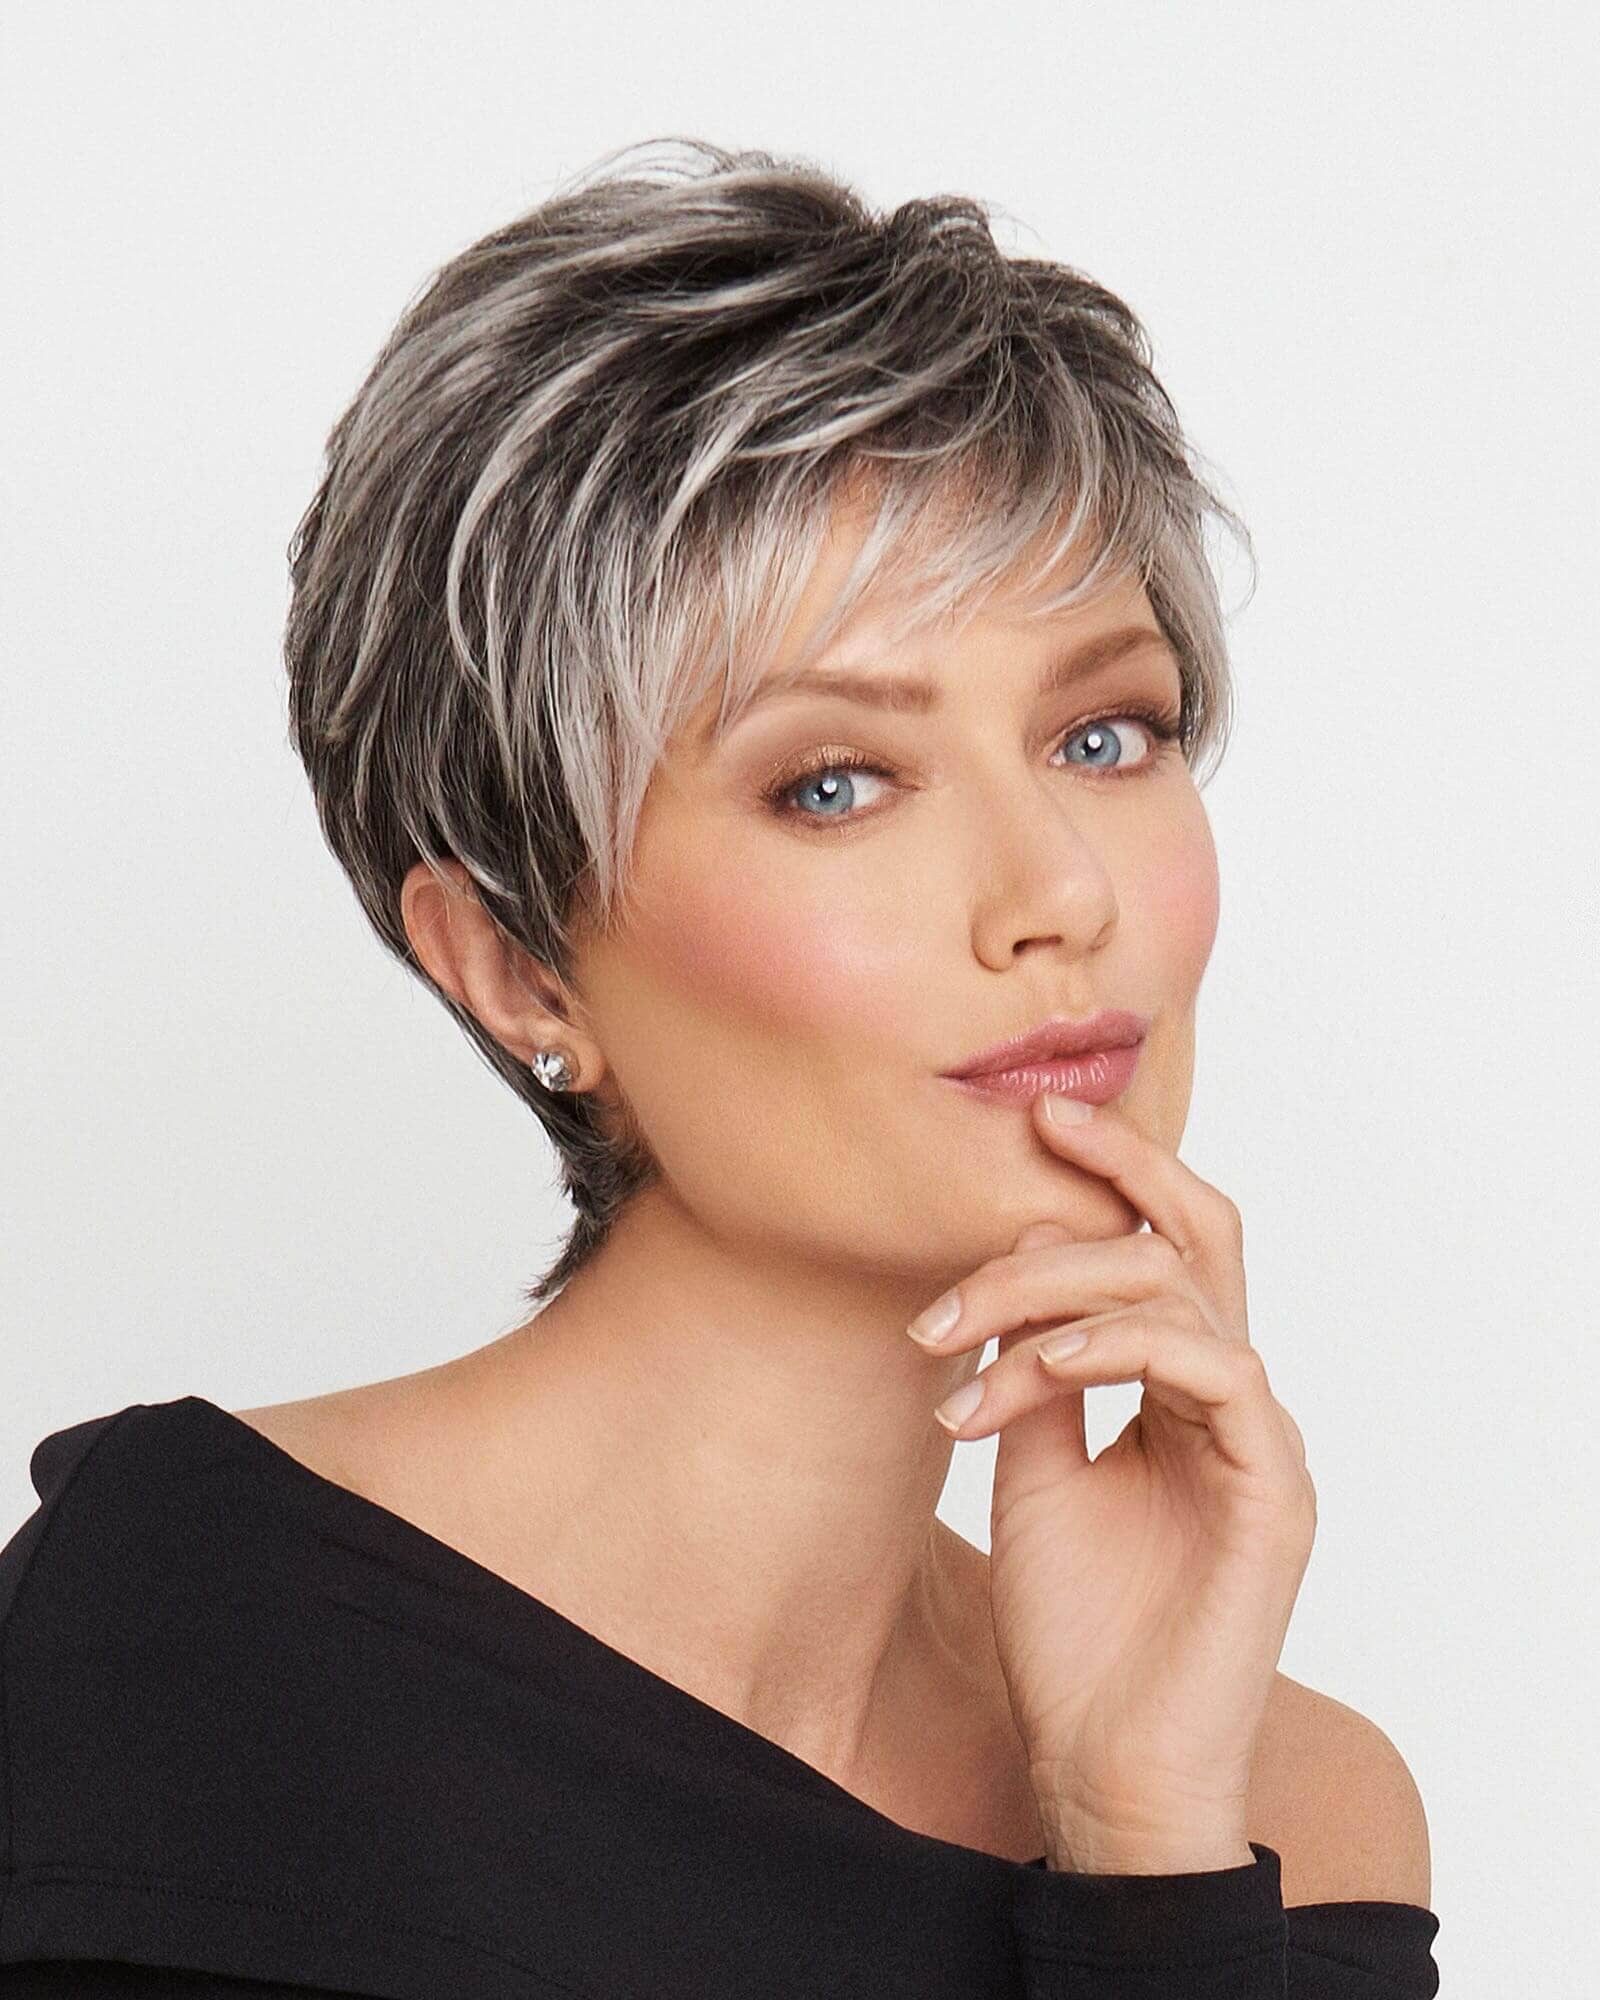 woman with a soft curly pixie cut hairstyle